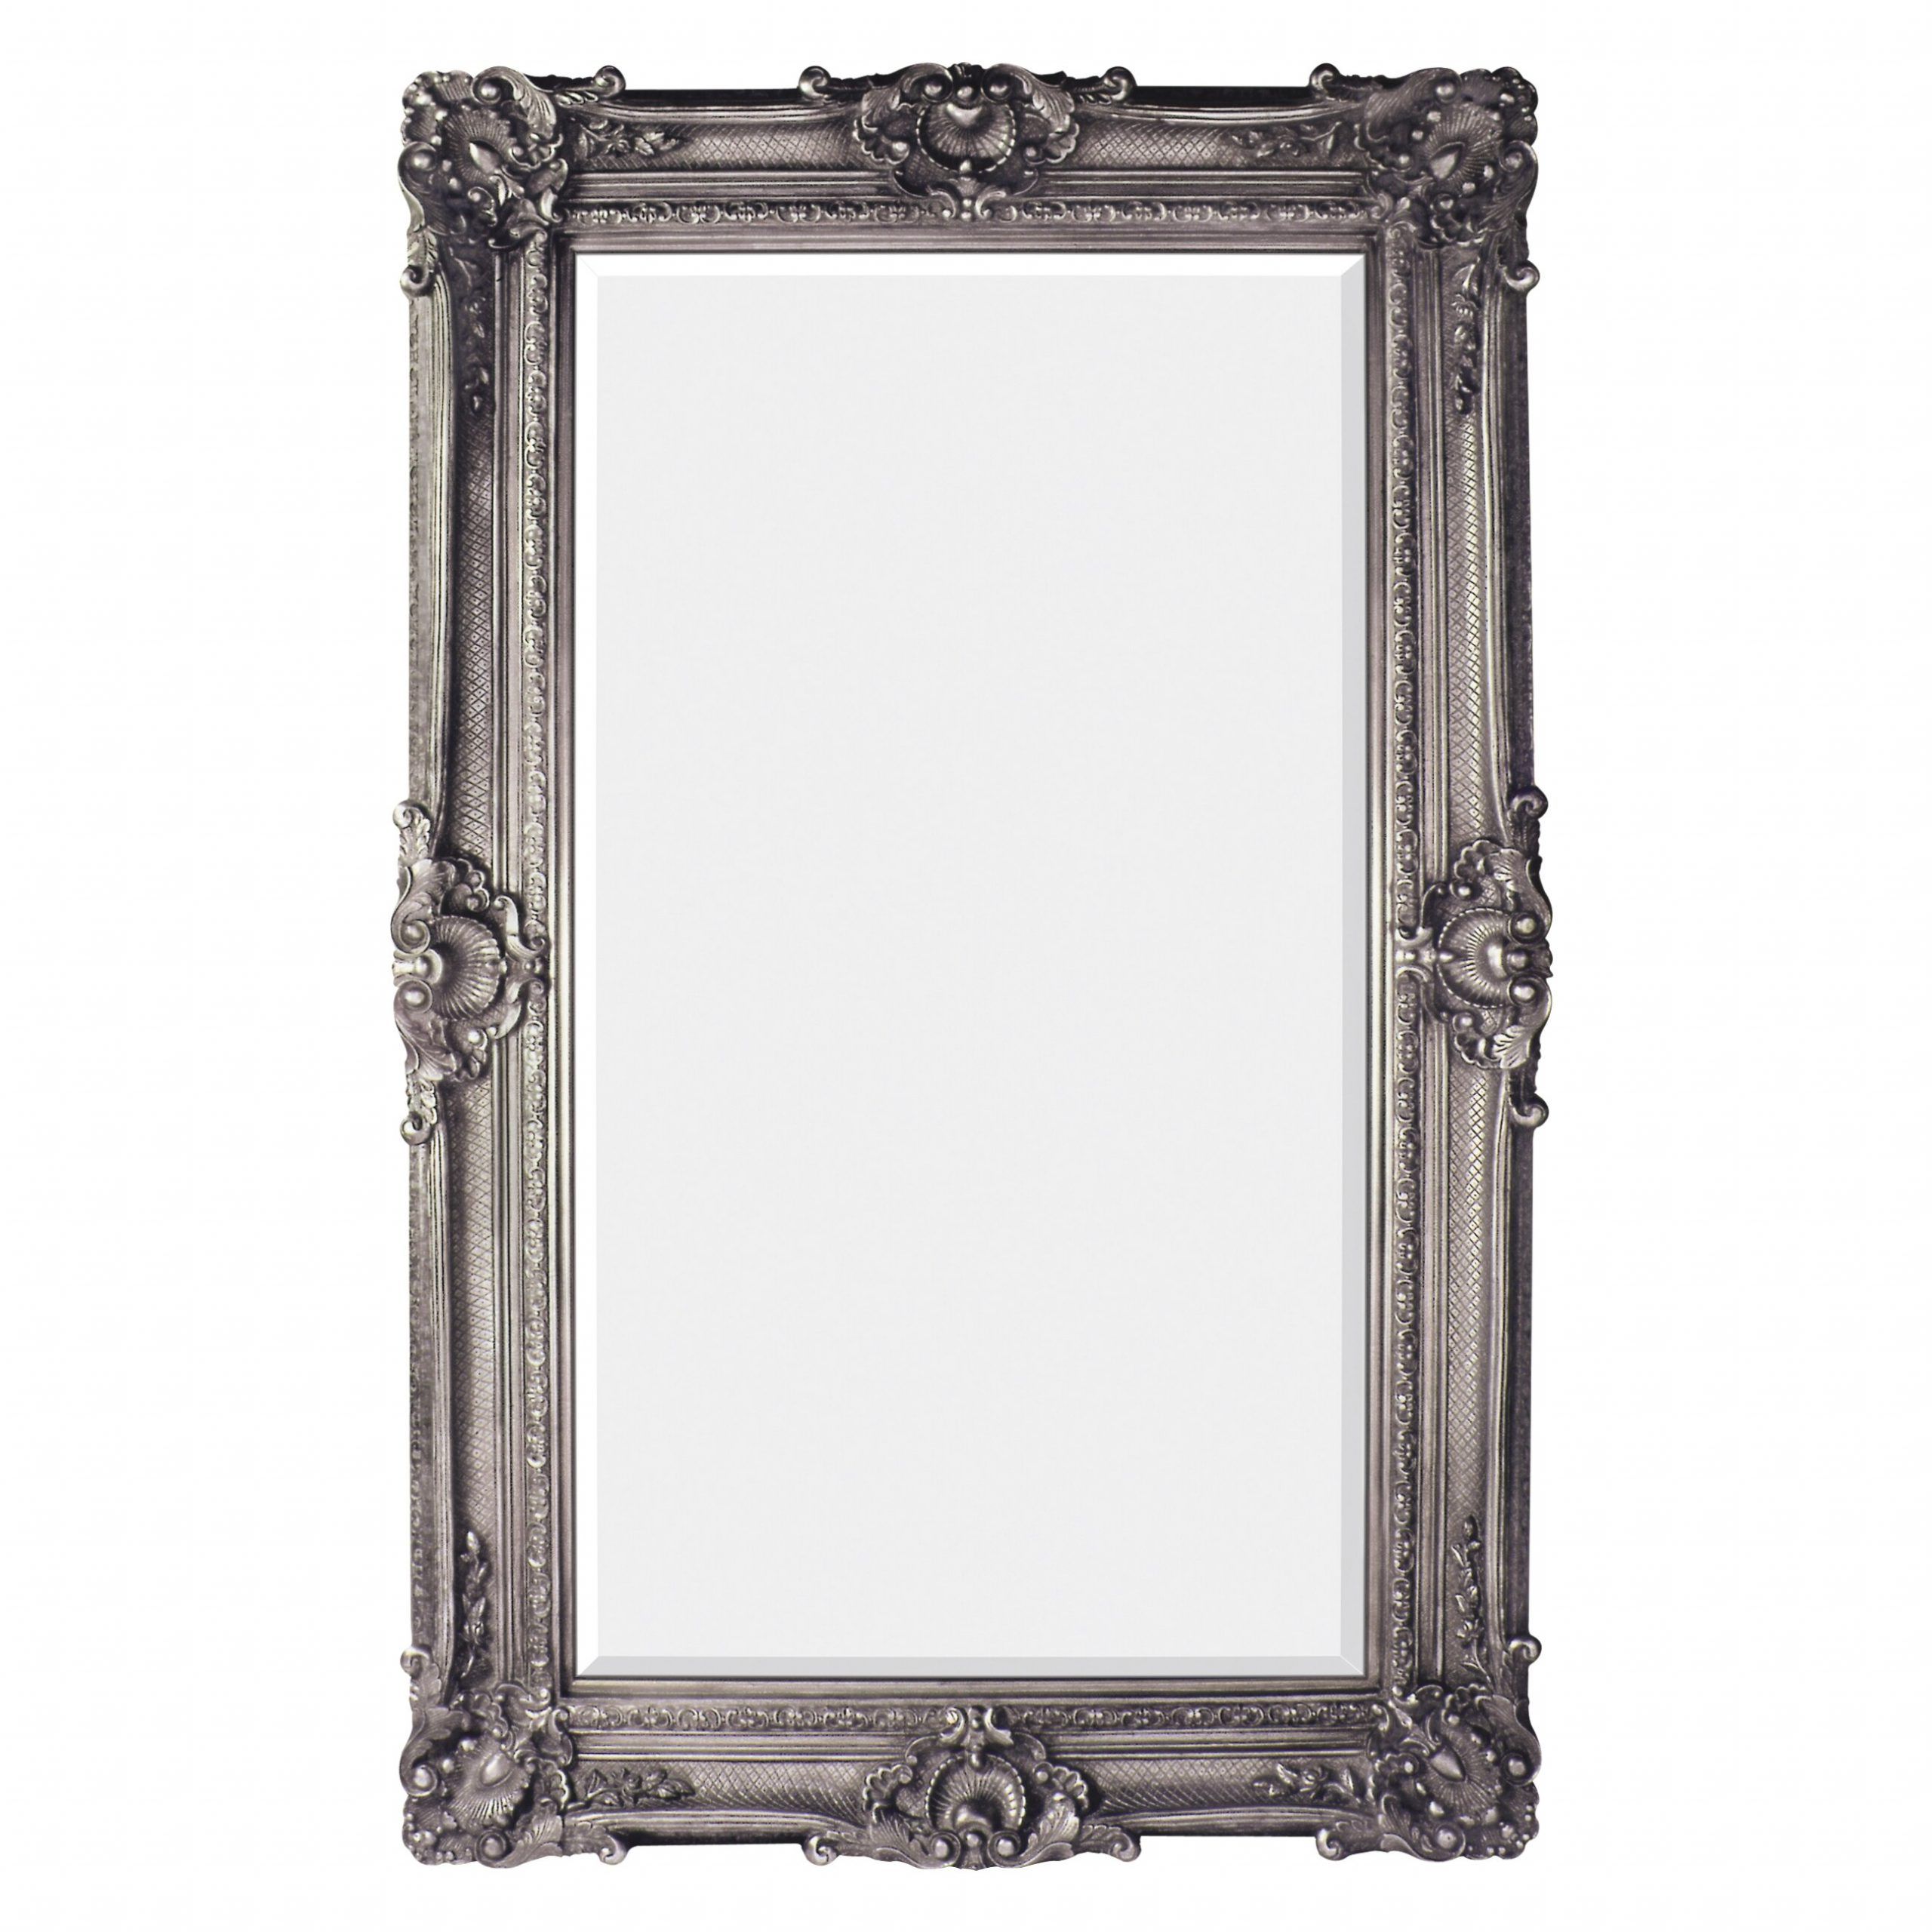 Majestic Mirror Antique Silver Leaf Finish Traditional Framed Beveled Regarding Metallic Gold Leaf Wall Mirrors (View 12 of 15)